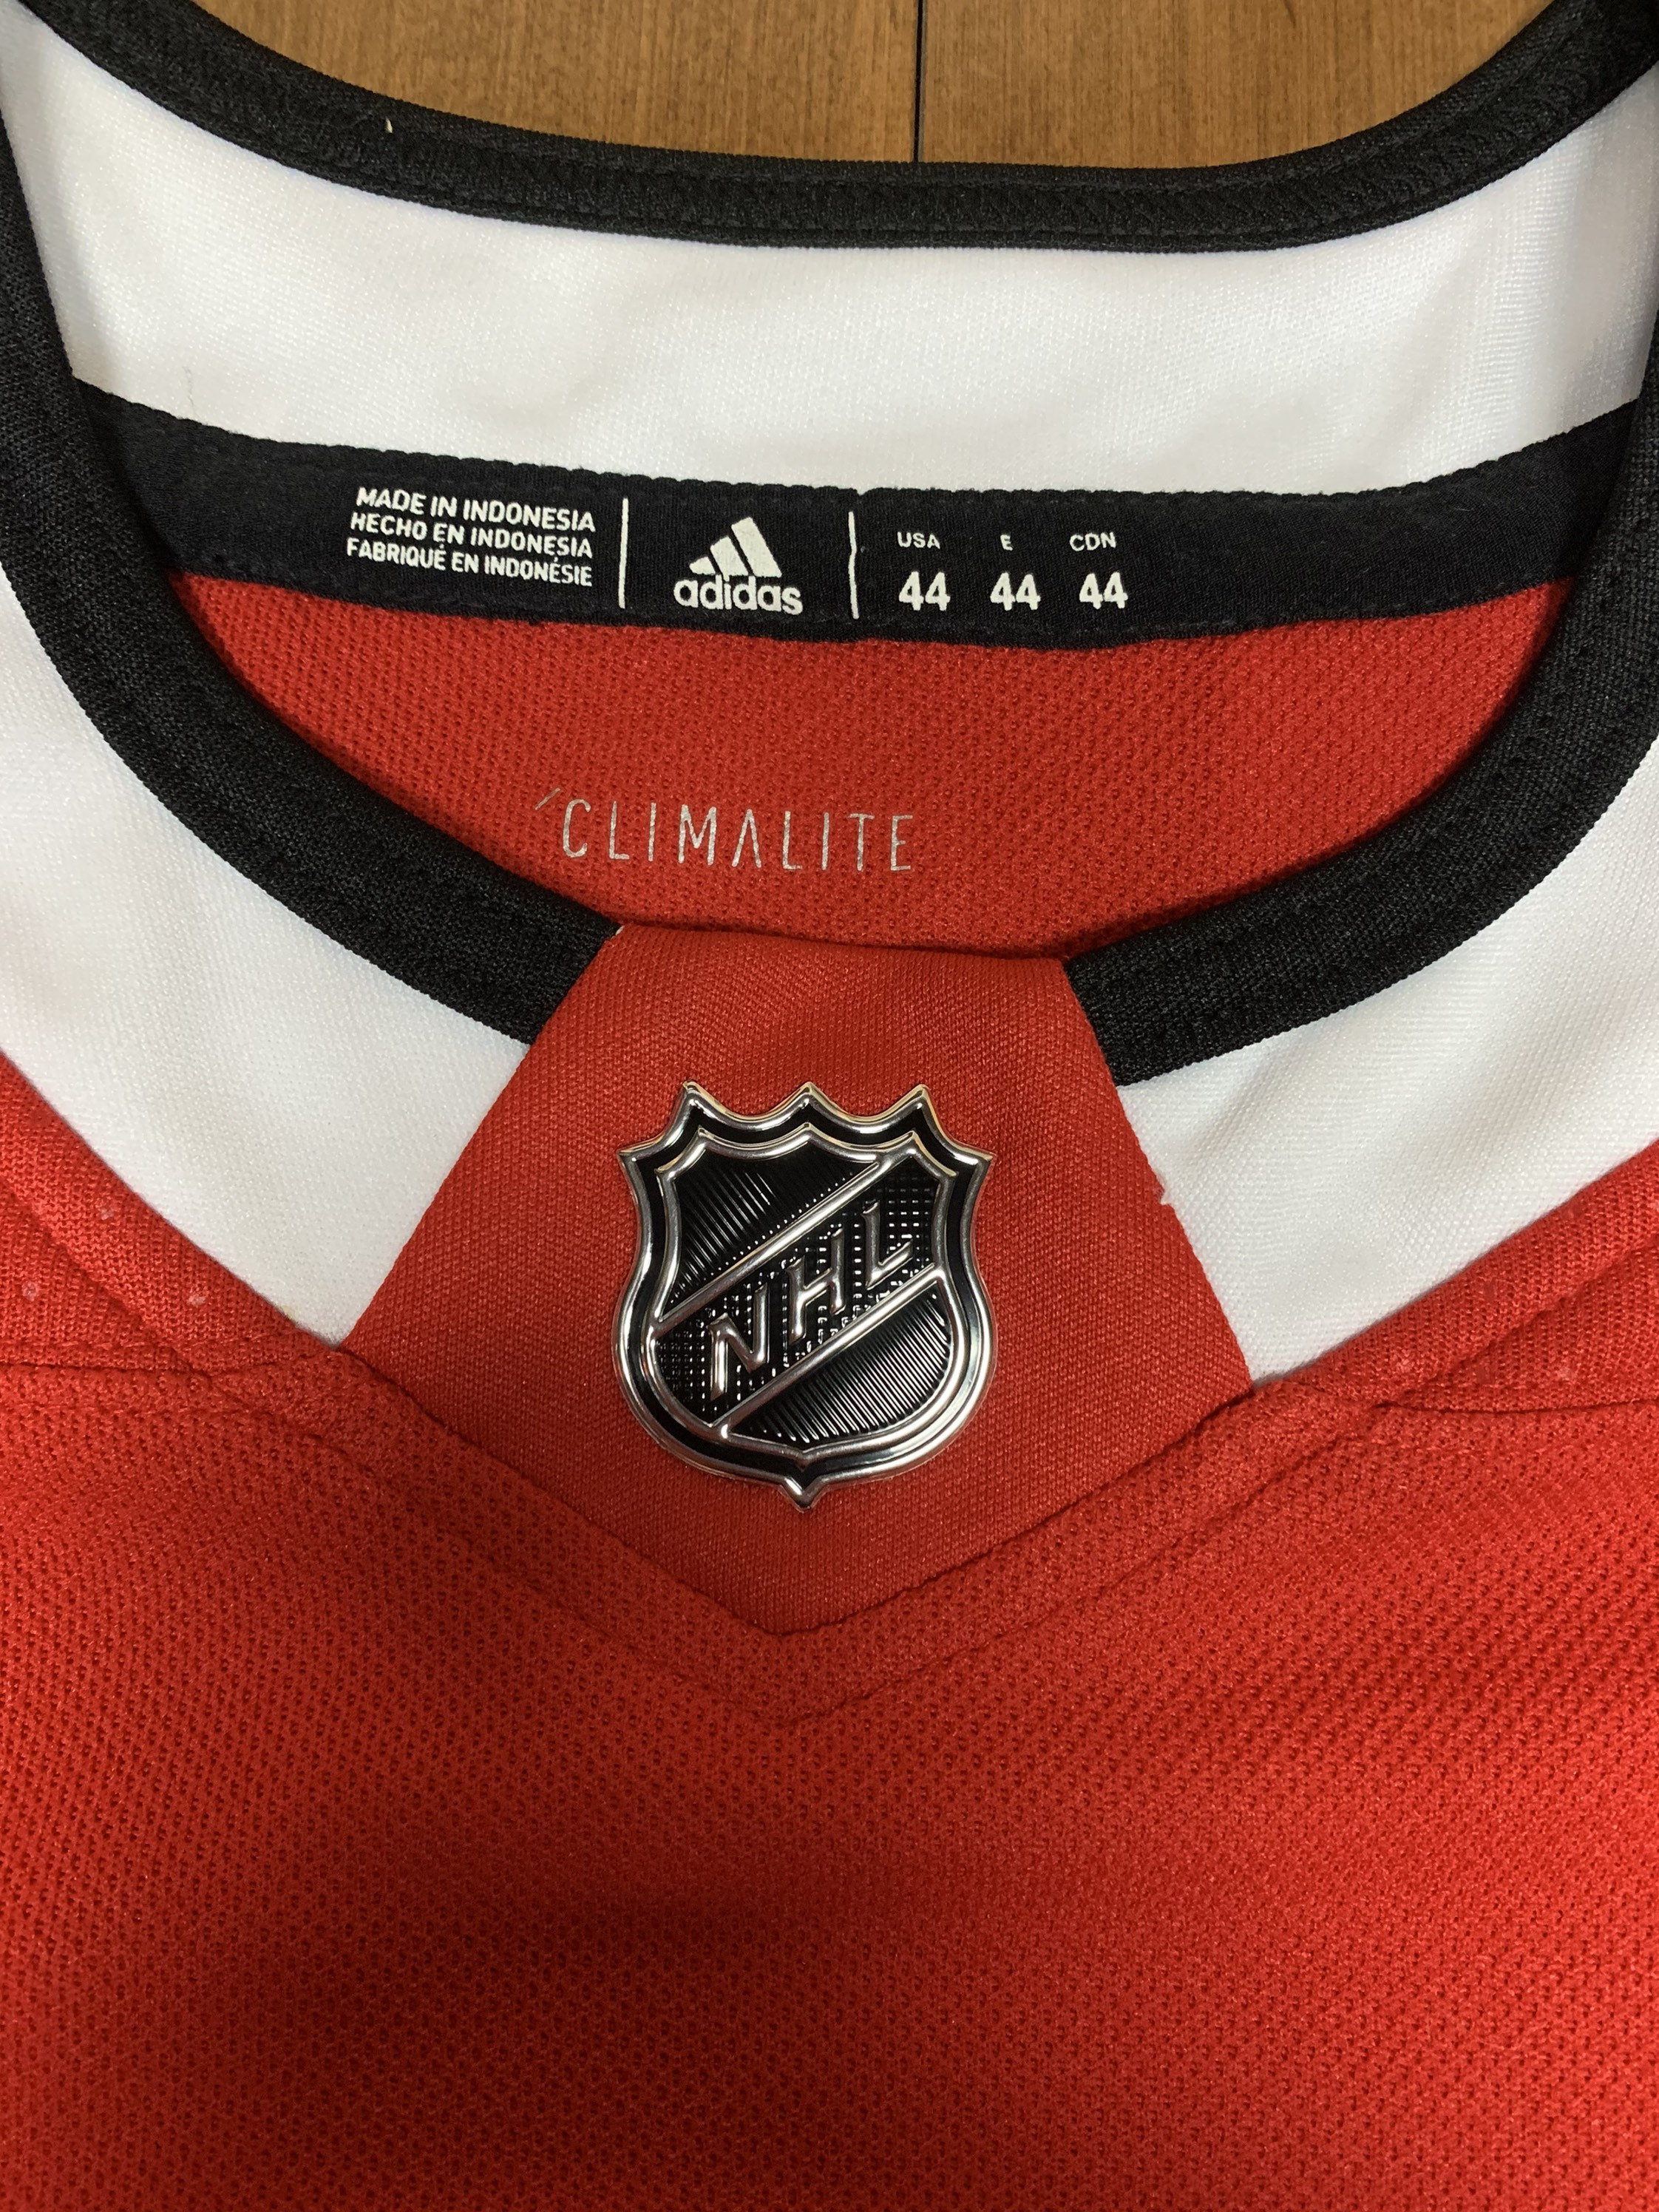 NHL Chicago Blackhawks Jersey With Fight Strap Embroidered -  Denmark